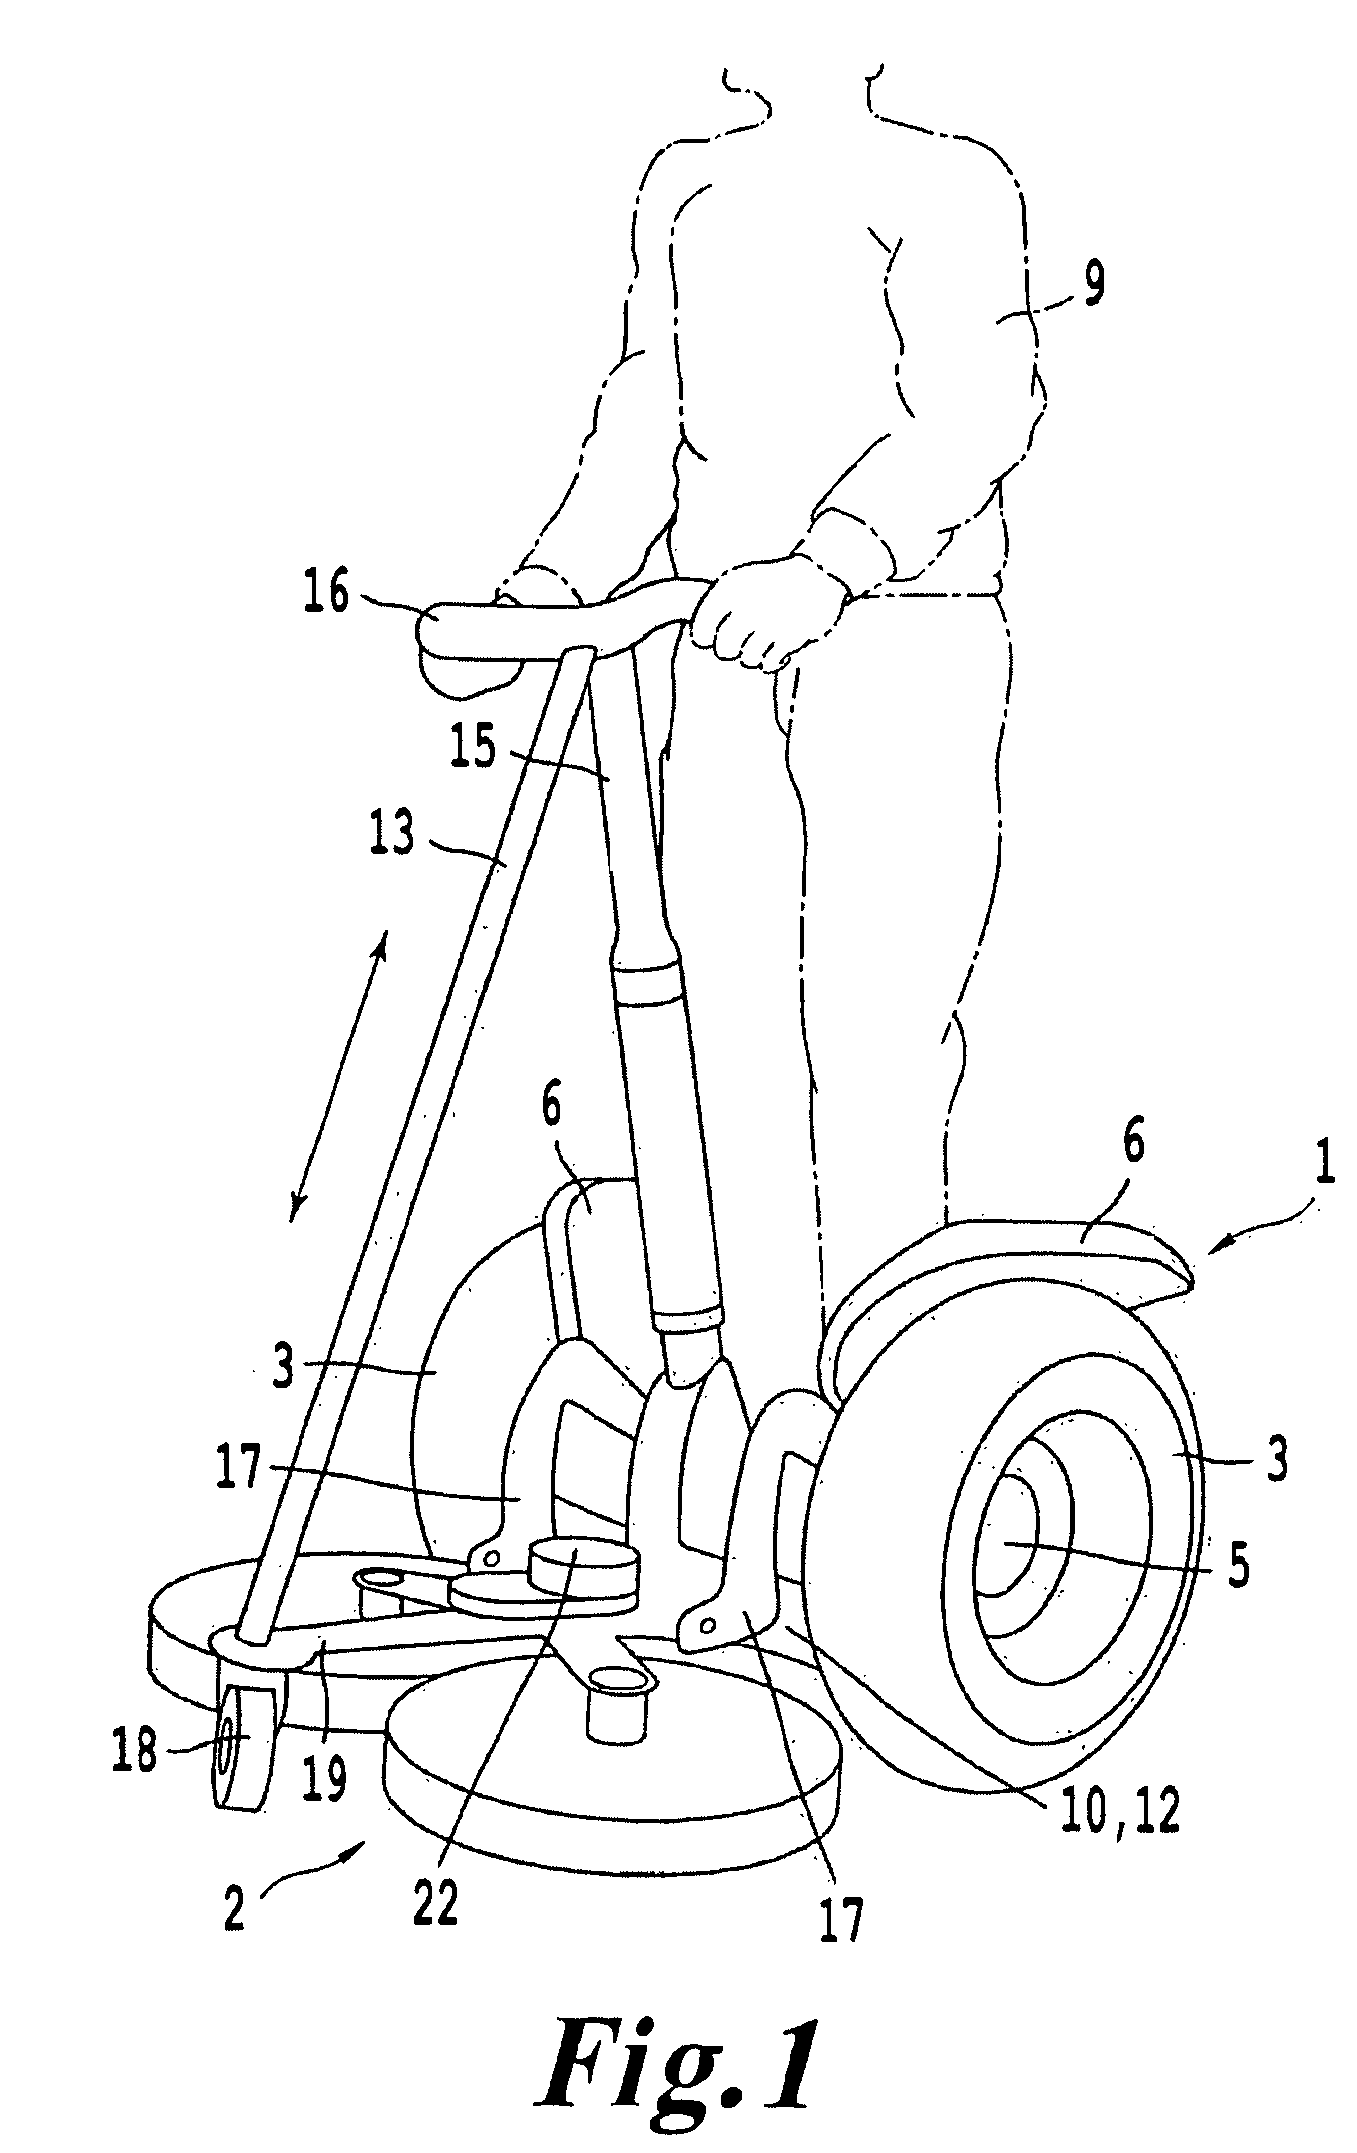 Single-drive-axis vehicle with a platform and/or a seat for a driver